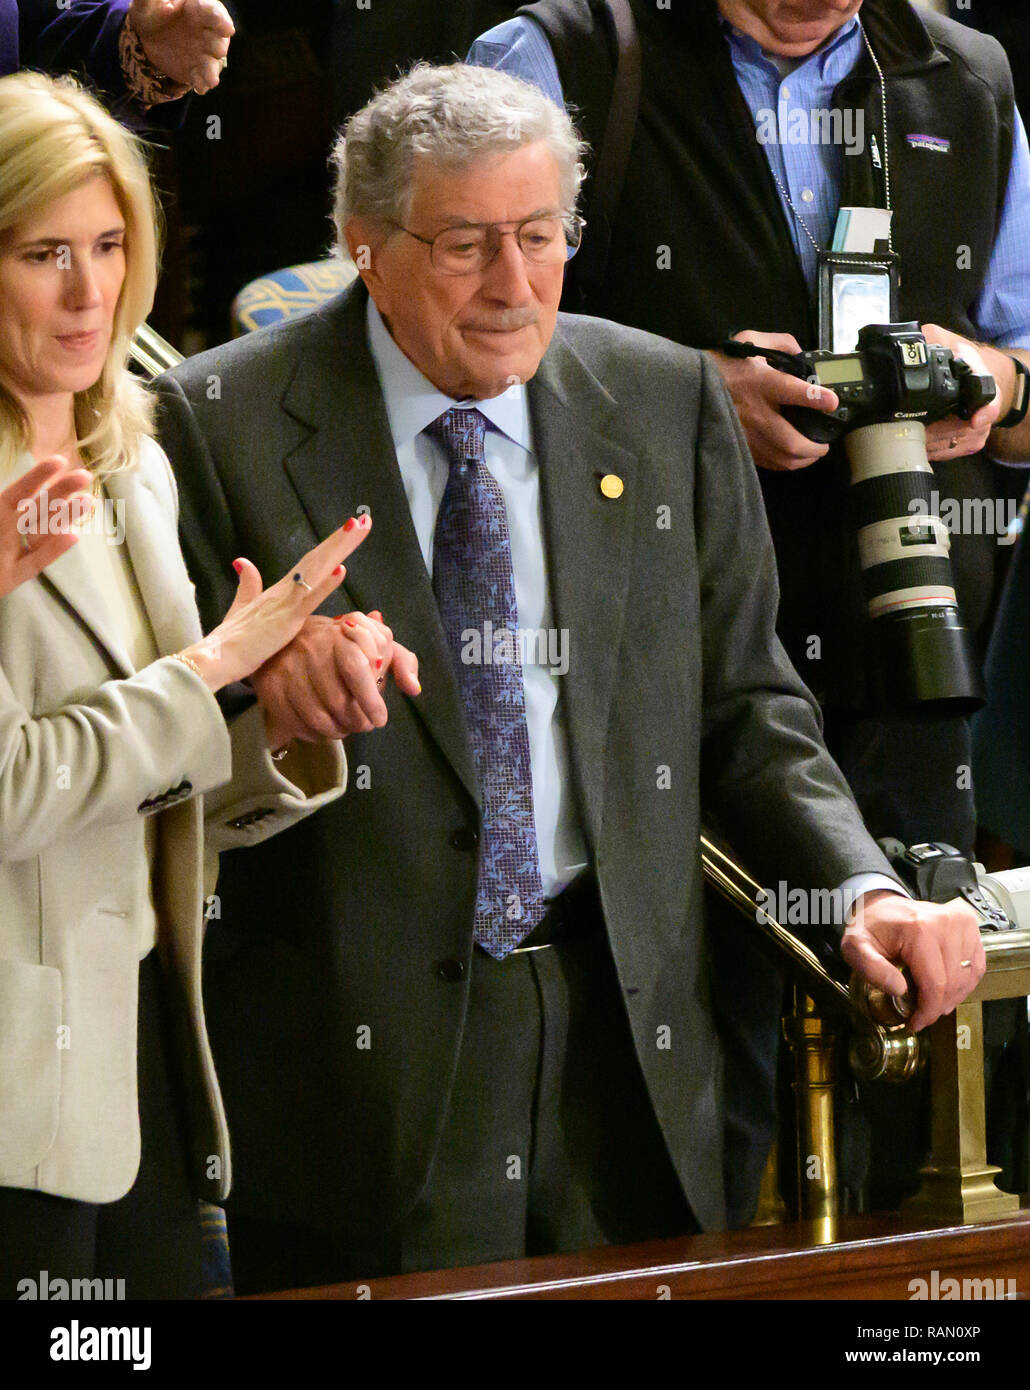 Washington, United States Of America. 03rd Jan, 2019. Singer Tony Bennett, a guest of Speaker of the United States House of Representatives Nancy Pelosi (Democrat of California), stands in the gallery as the 116th Congress convenes for its opening session in the US House Chamber of the US Capitol in Washington, DC on Thursday, January 3, 2019. Credit: Ron Sachs/CNP (RESTRICTION: NO New York or New Jersey Newspapers or newspapers within a 75 mile radius of New York City) | usage worldwide Credit: dpa/Alamy Live News Stock Photo